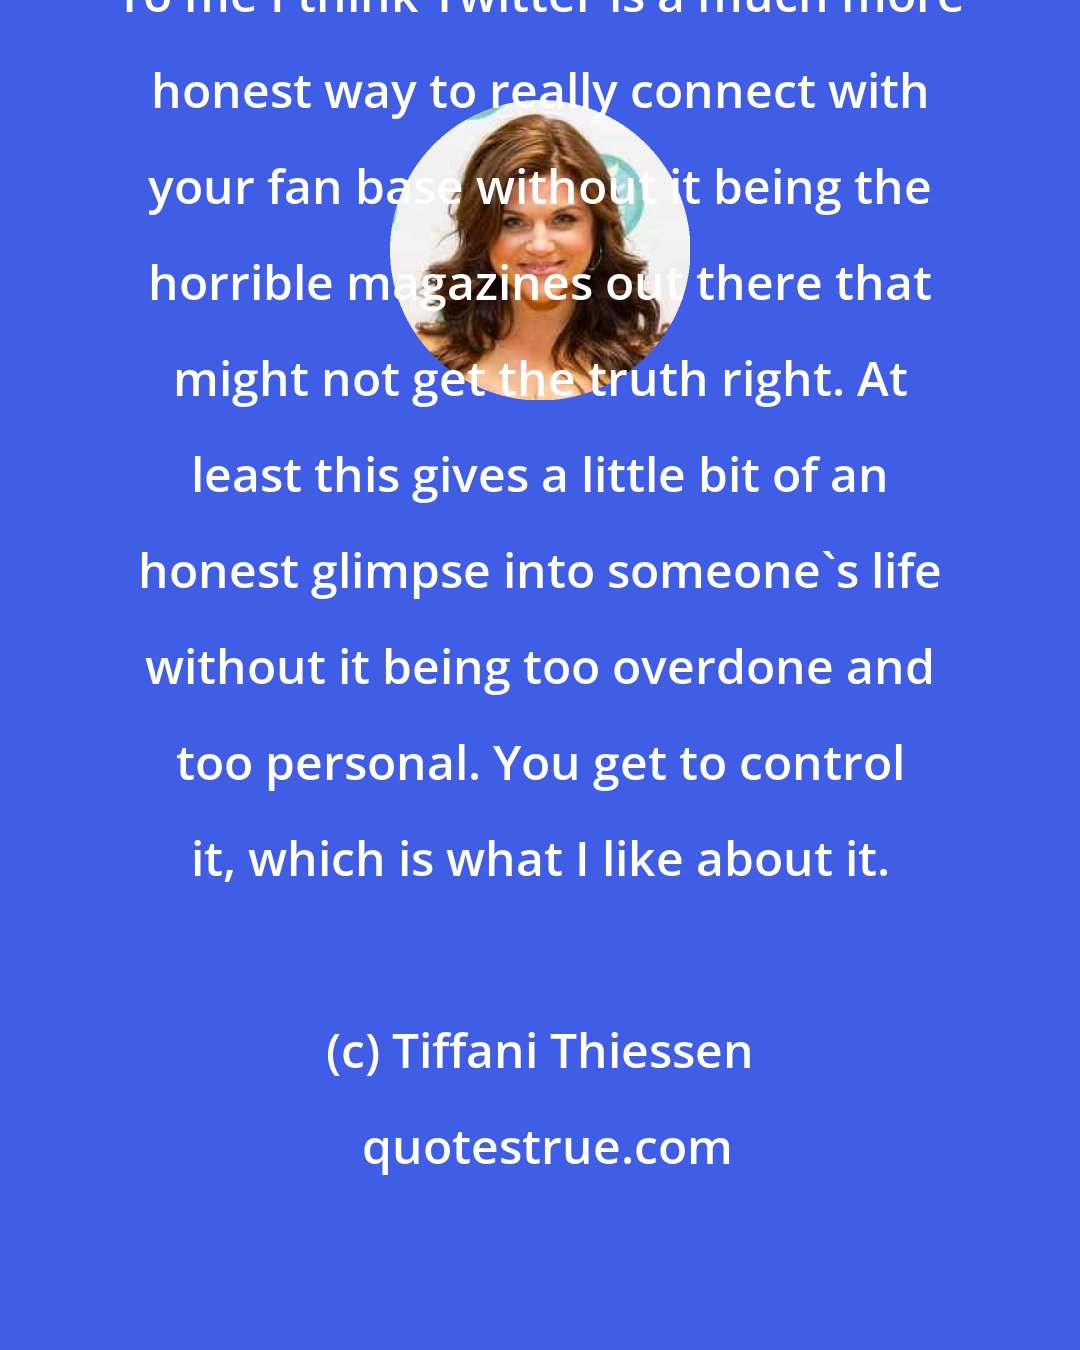 Tiffani Thiessen: To me I think Twitter is a much more honest way to really connect with your fan base without it being the horrible magazines out there that might not get the truth right. At least this gives a little bit of an honest glimpse into someone's life without it being too overdone and too personal. You get to control it, which is what I like about it.